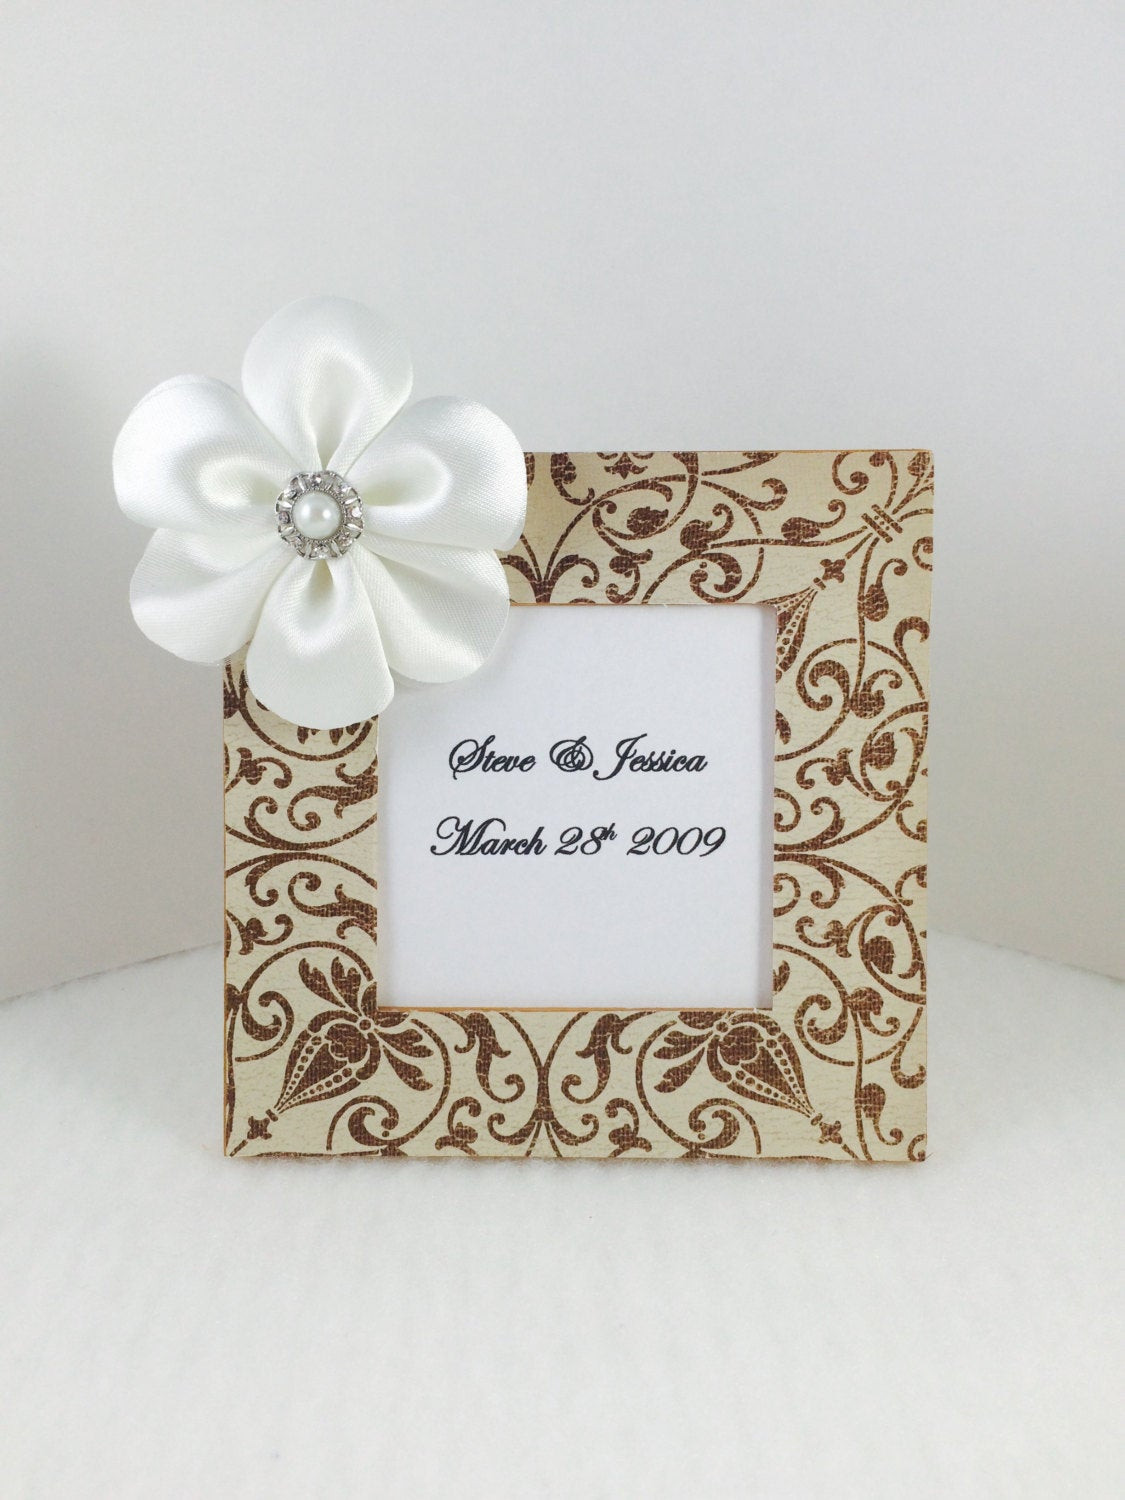 Picture Frame Wedding Favors
 Rustic wedding Party Favor Mini picture frame 5x5 photo